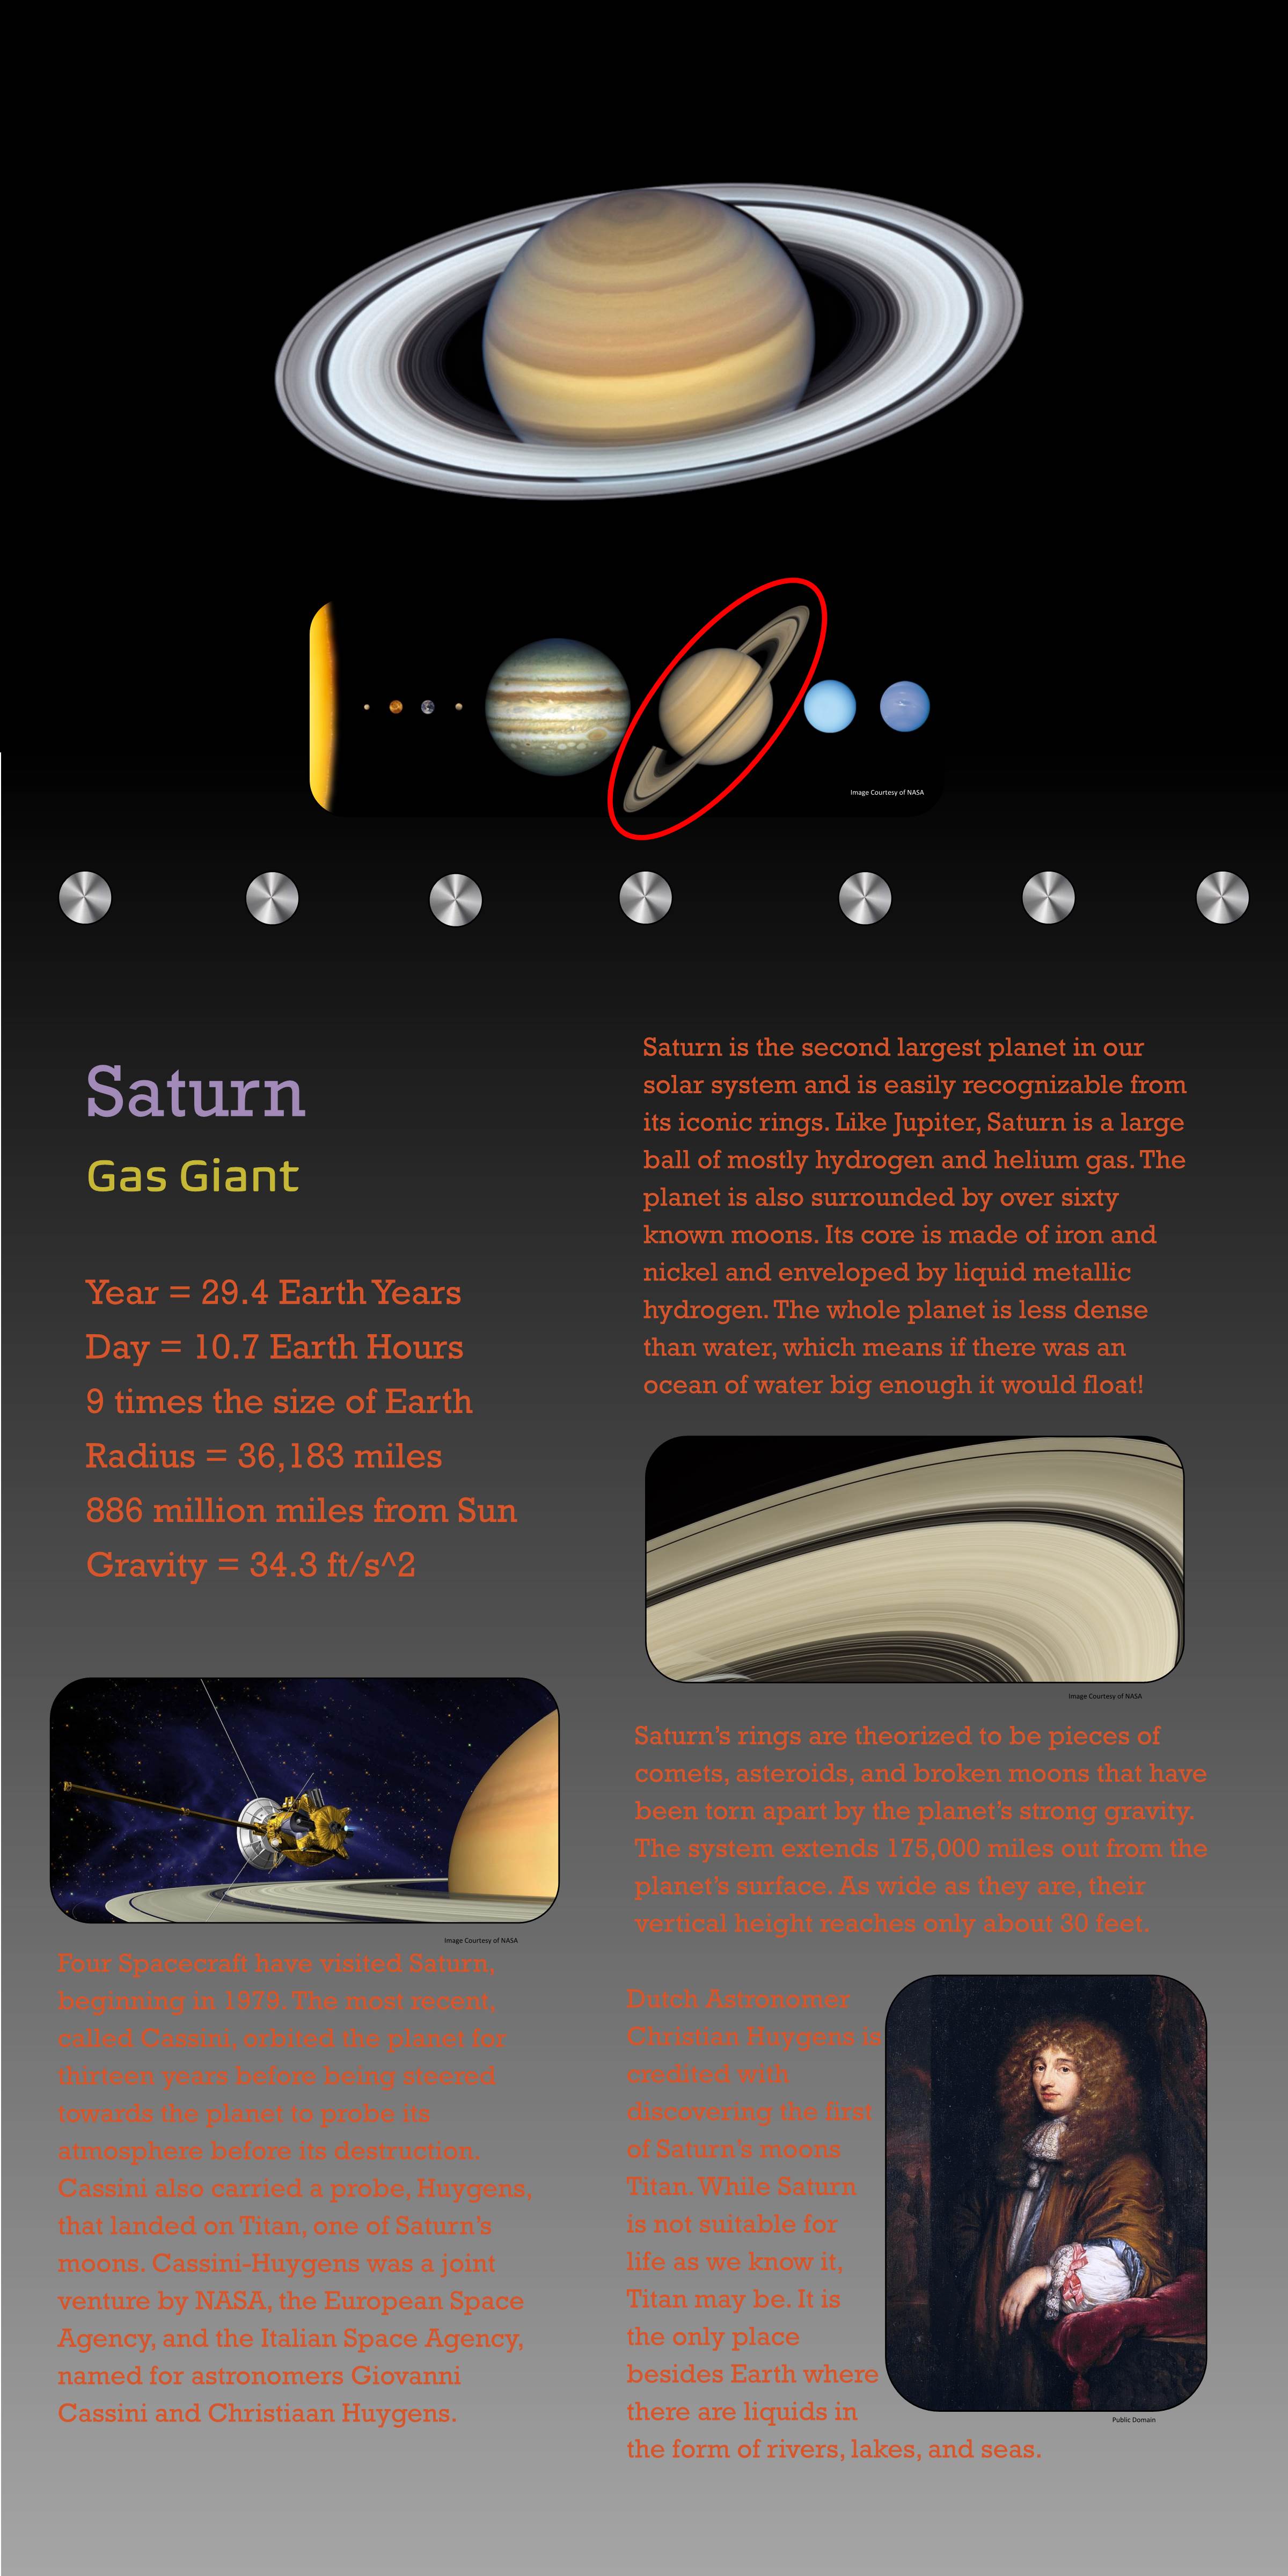 Saturn Is the Second Largest Planet in Our Solar System and Is Easily Recognizable from Saturn Its Iconic Rings